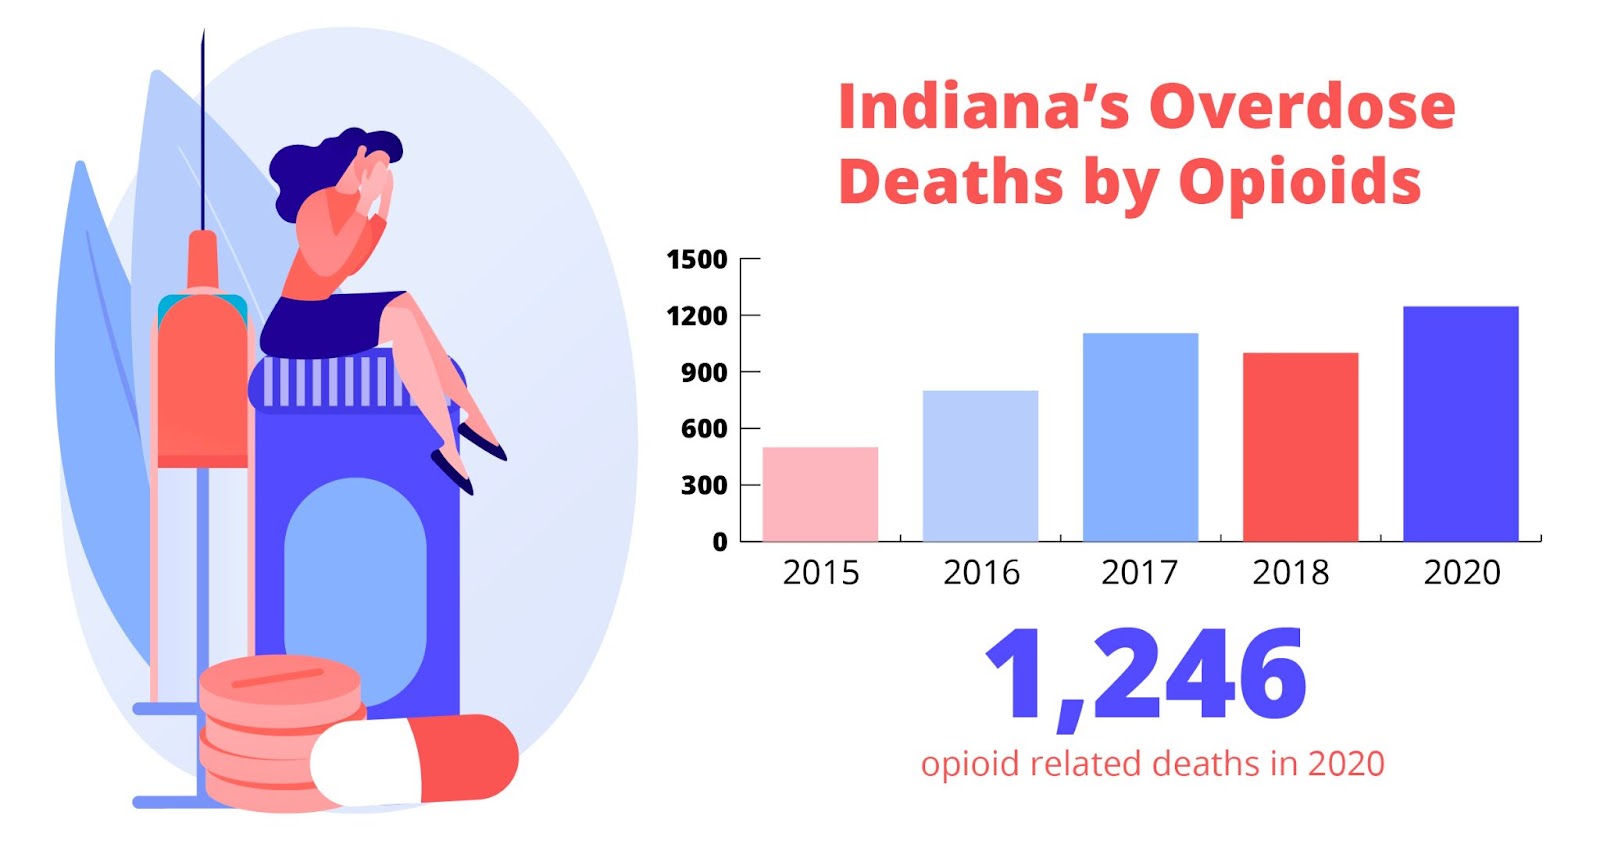 Indiana's overdose deaths by opioids graph. 1,246 opioid related deaths in 2020